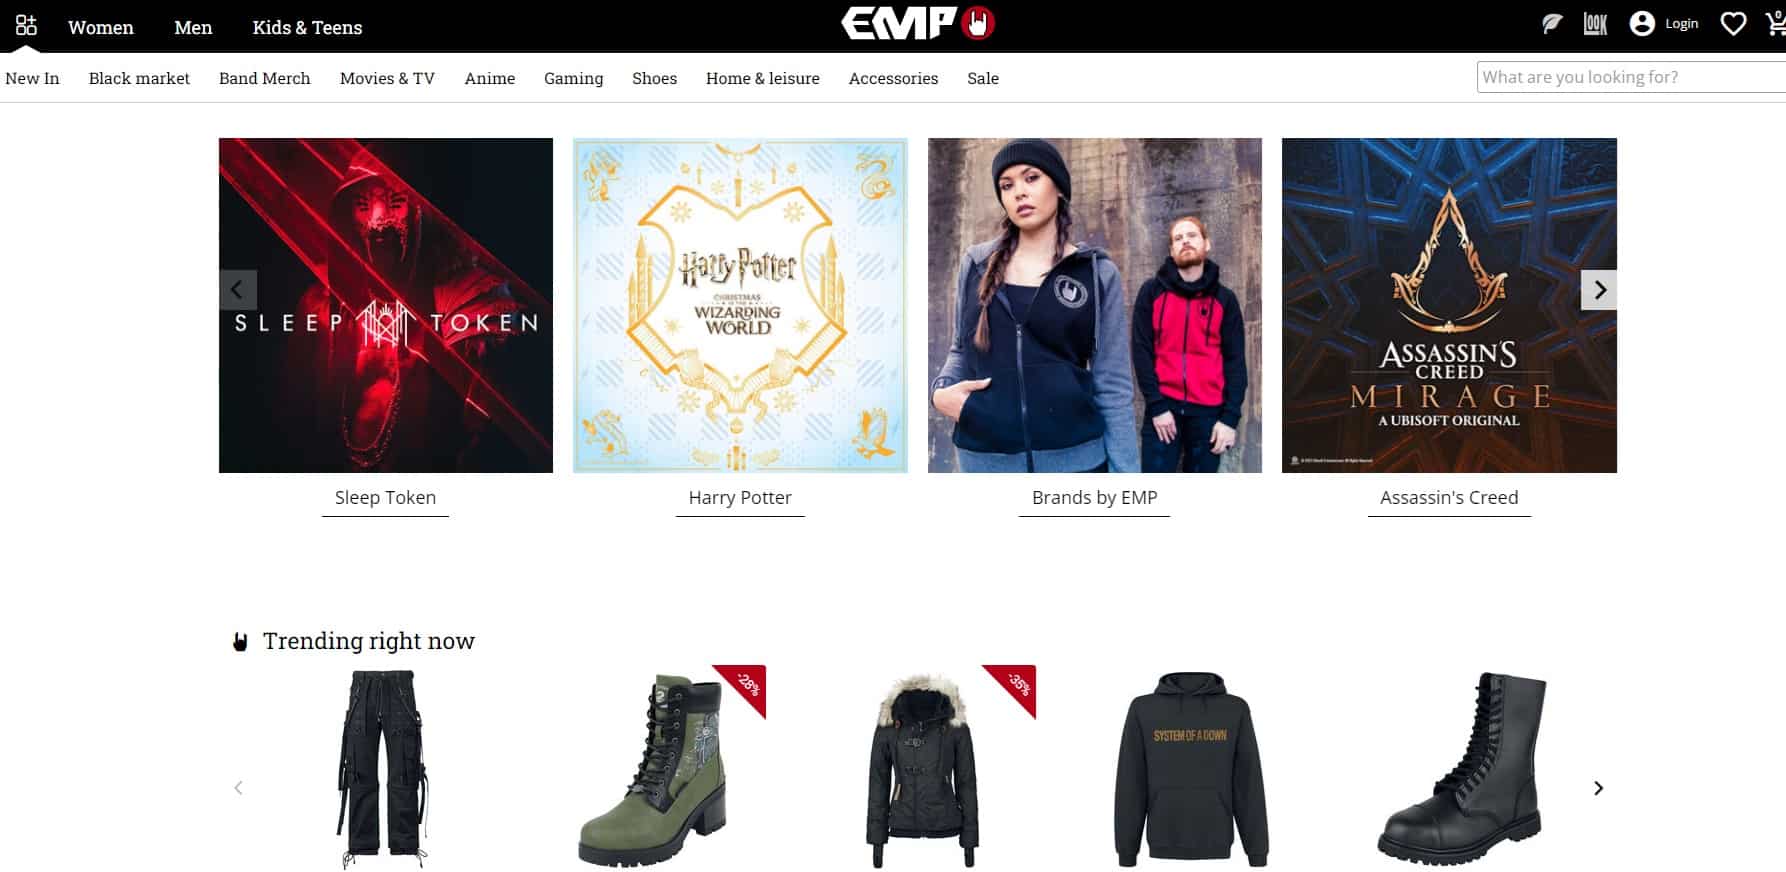 EMP home page featuring Assassins' Creed merchandise 